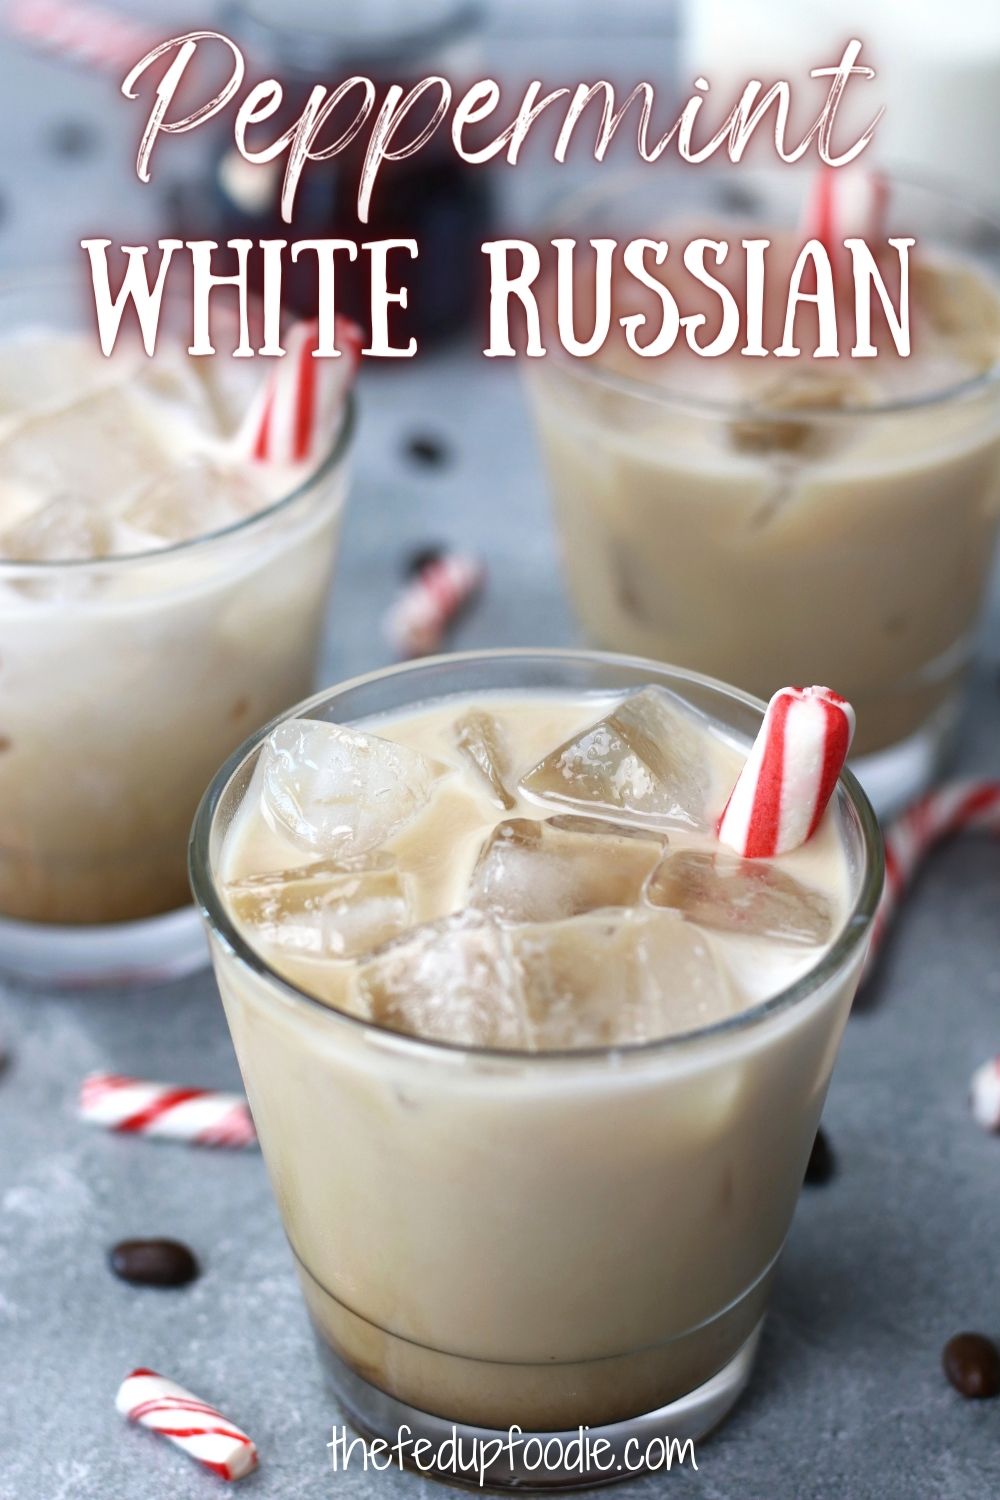 One of the easiest holiday cocktails, this Peppermint White Russian is rich, creamy and refreshing. Made with coffee liqueur, peppermint liqueur and cream. 
#PeppermintWhiteRussian #PeppermintWhiteRussianKahlua #PerfectlyPeppermintWhiteRussian #ChristmasPeppermintWhiteRussian #BoozyChristmasDrinks #PeppermintAlcoholicDrinks #PeppermintCocktails